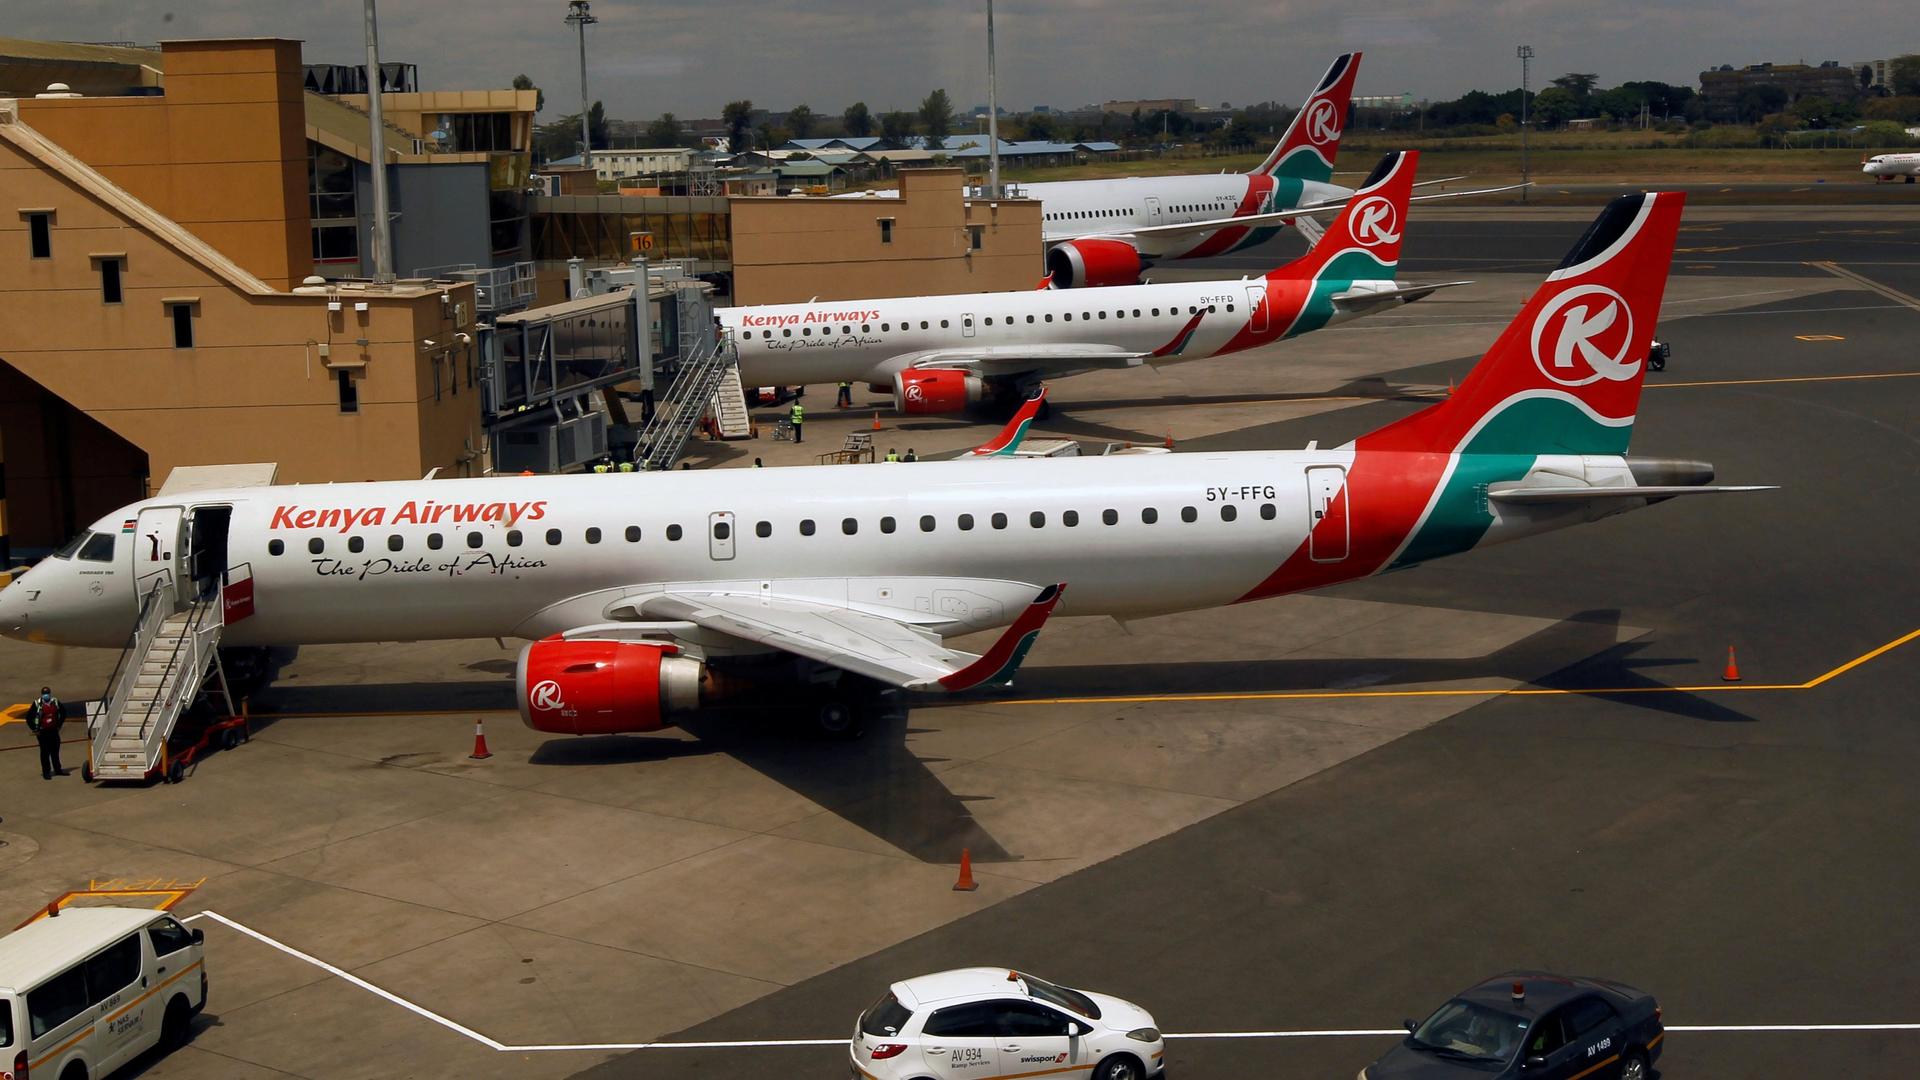 Several white airplanes with Kenya Airways logo on them in red and green parked in airport. 